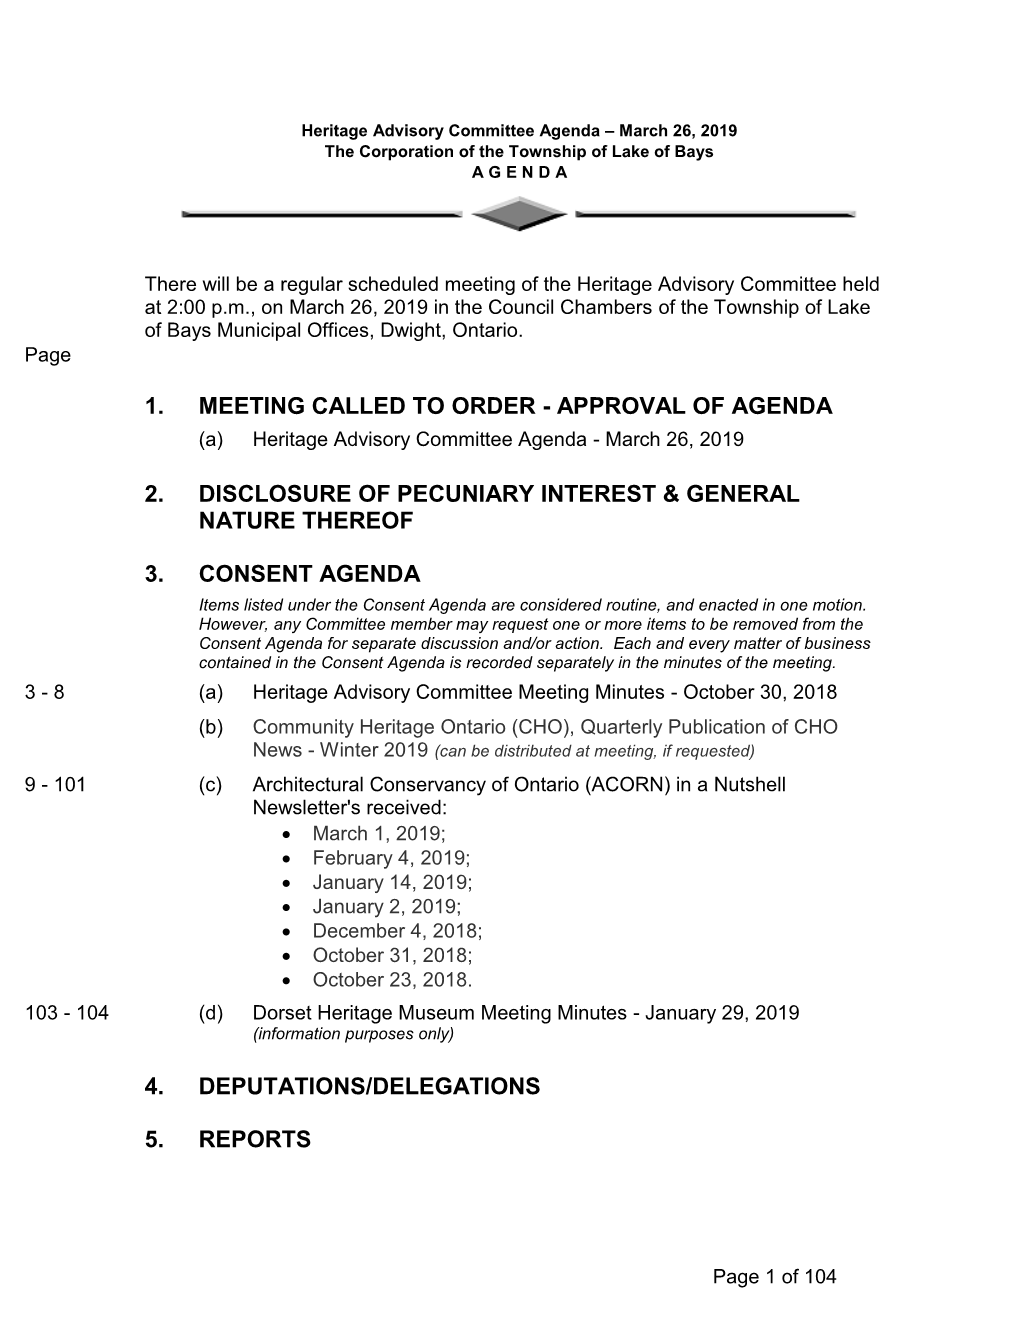 Heritage Committee Agenda - March 26, 2019 Page